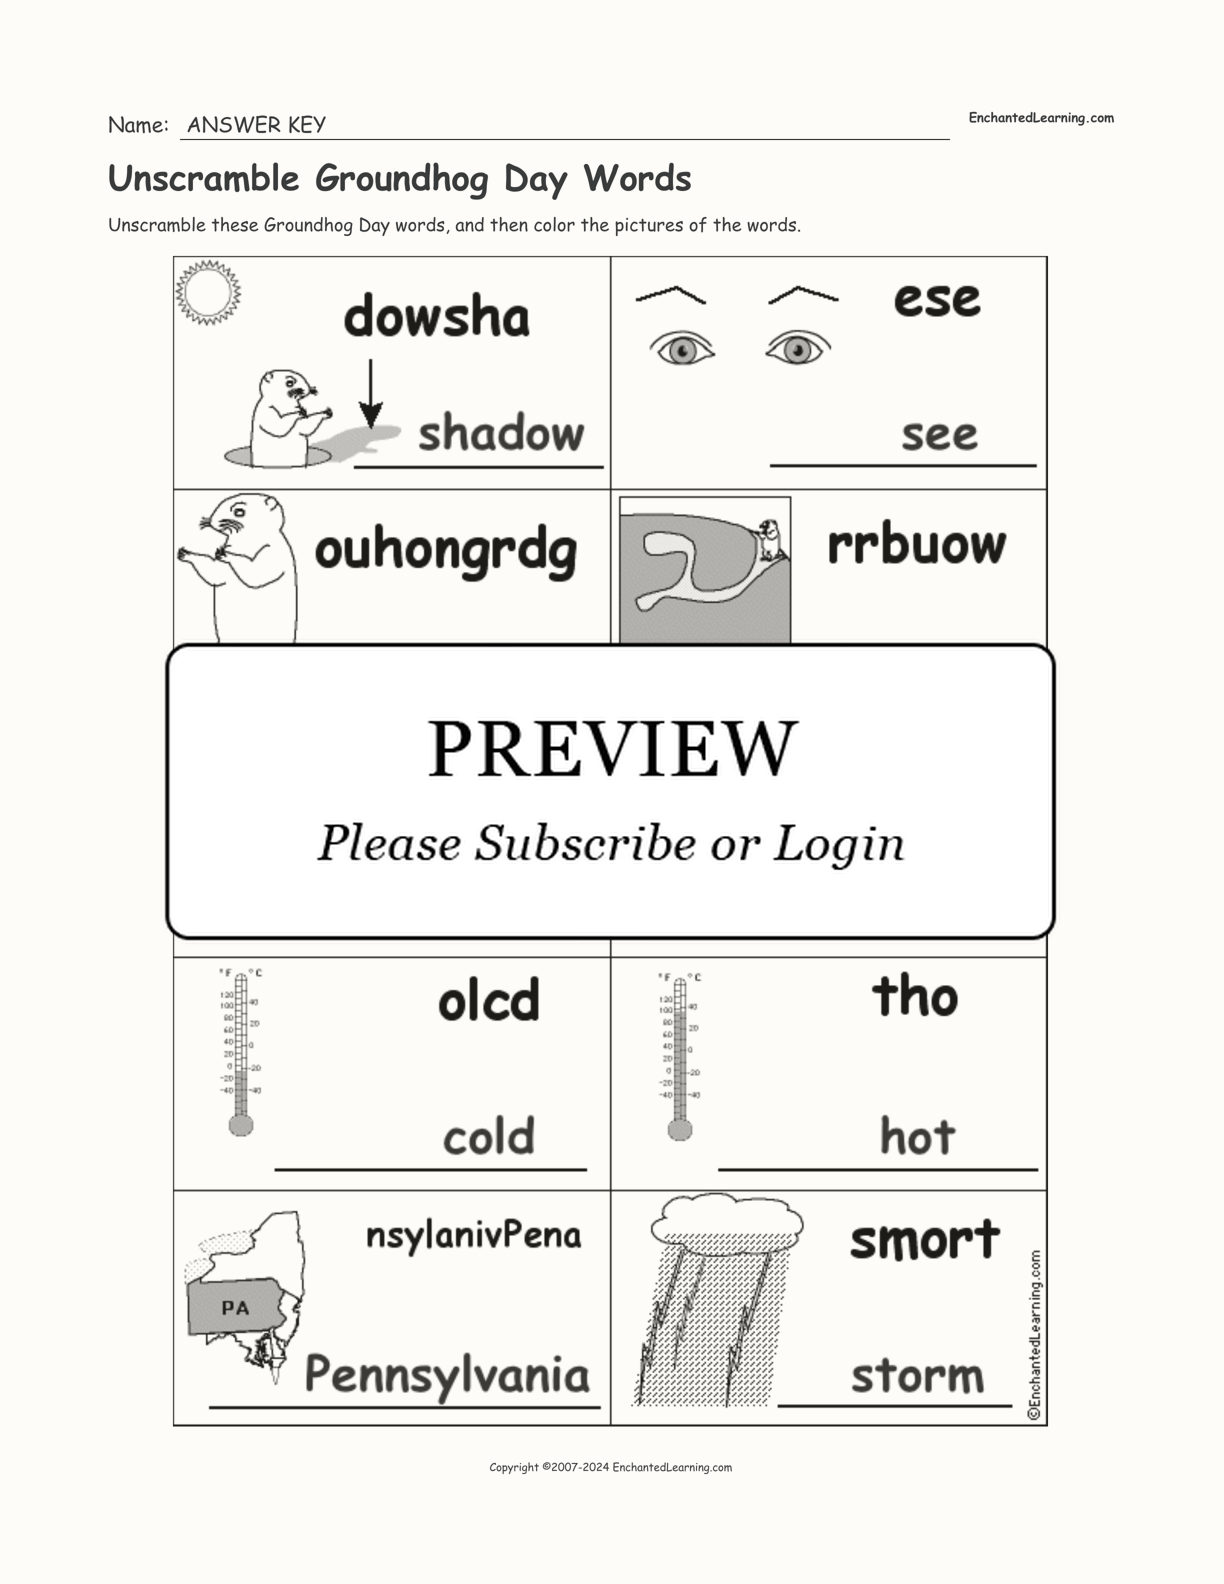 Unscramble Groundhog Day Words interactive worksheet page 2